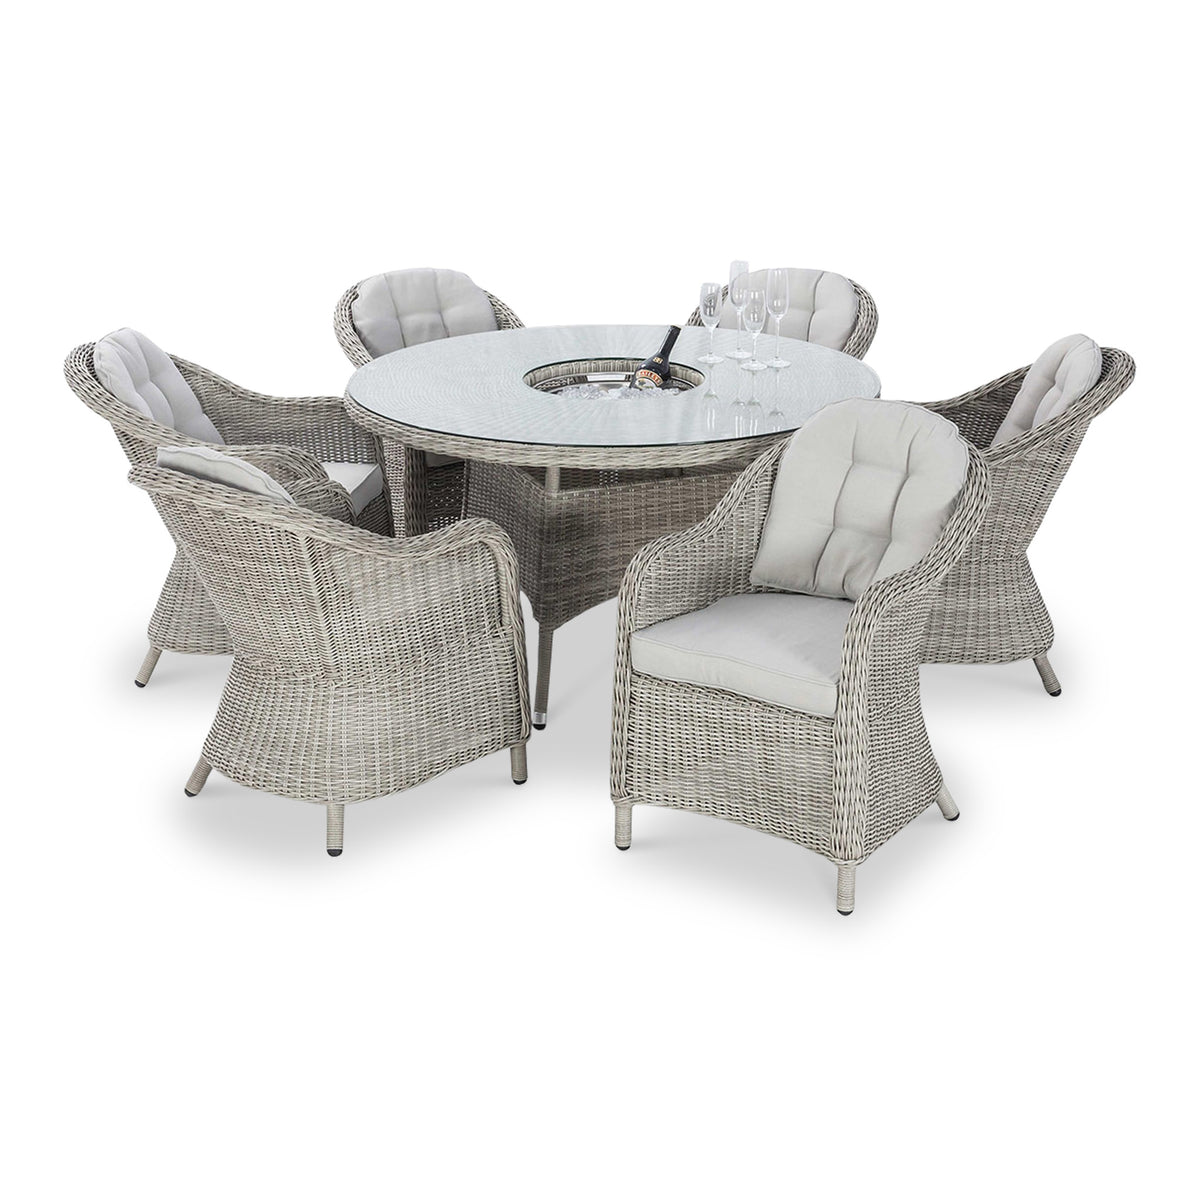 Maze Oxford 6 Seat Round Rattan Dining Set with Lazy Susan from Roseland Furniture